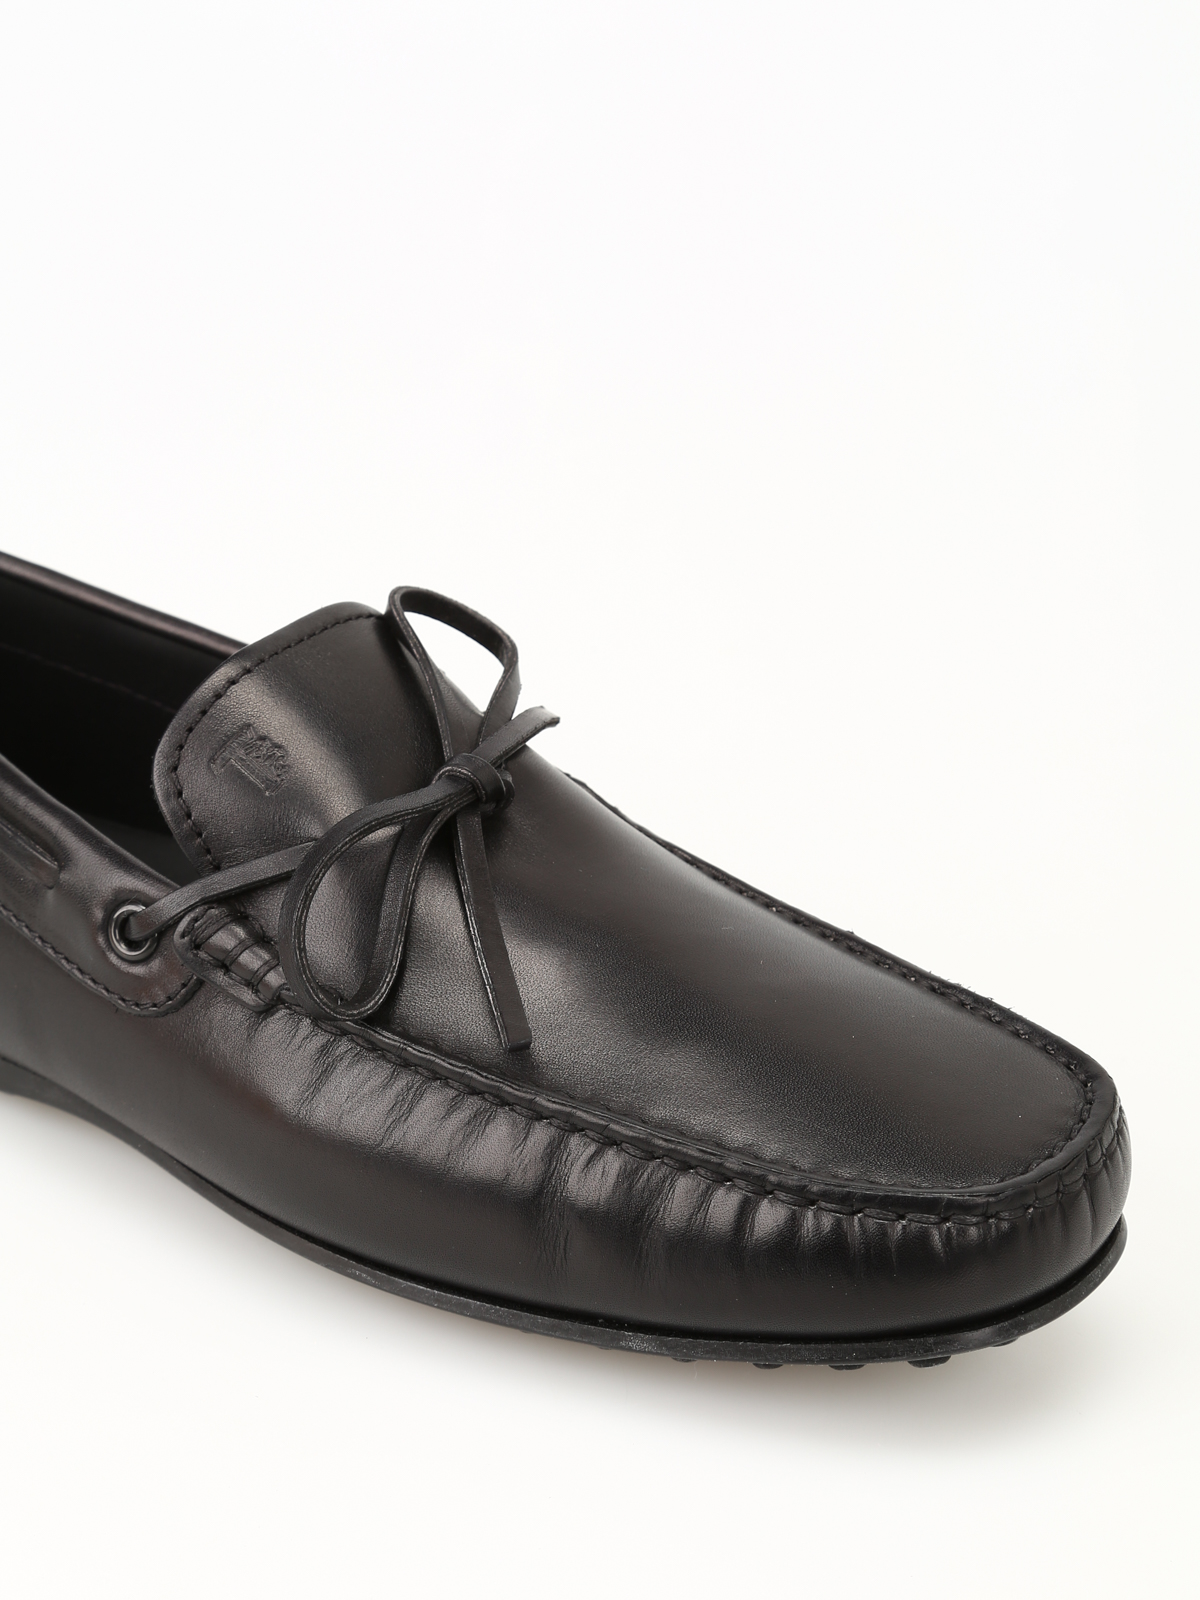 Wrok beproeving oppervlakte Loafers & Slippers Tod'S - City Gommino black leather loafers -  XXM0LR00051D90B999